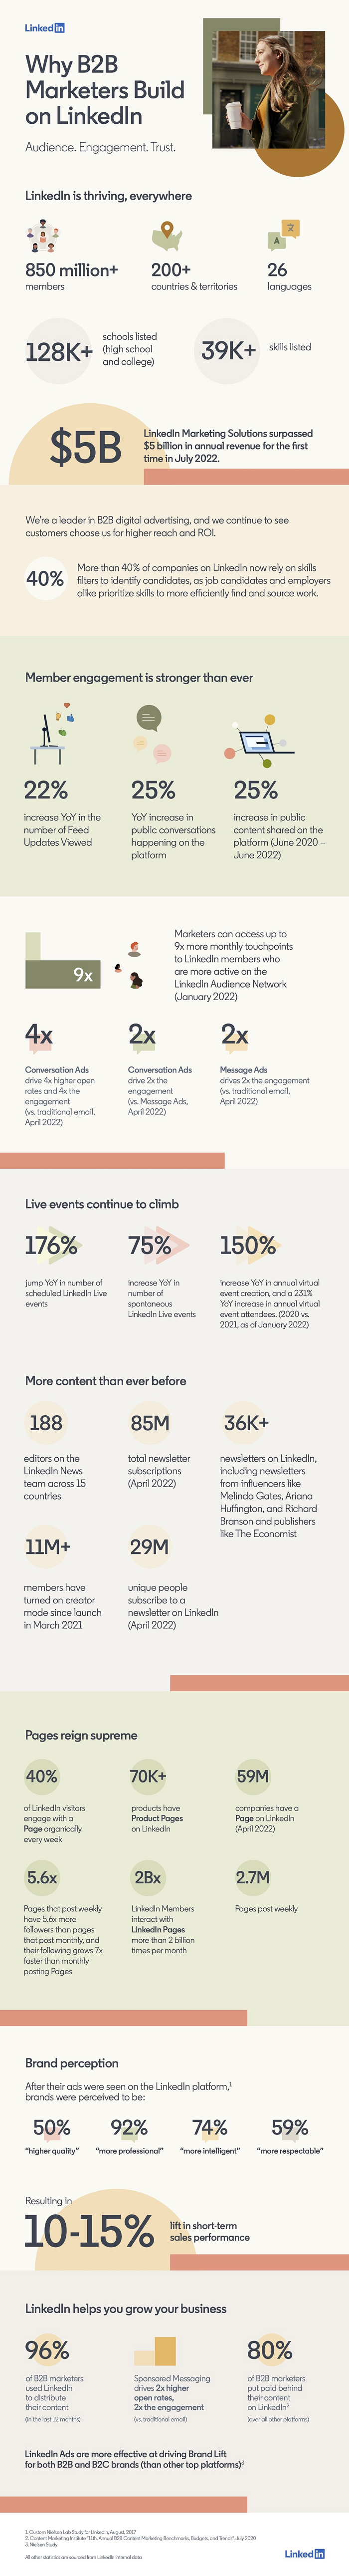 Why marketers build on LinkedIn infographic